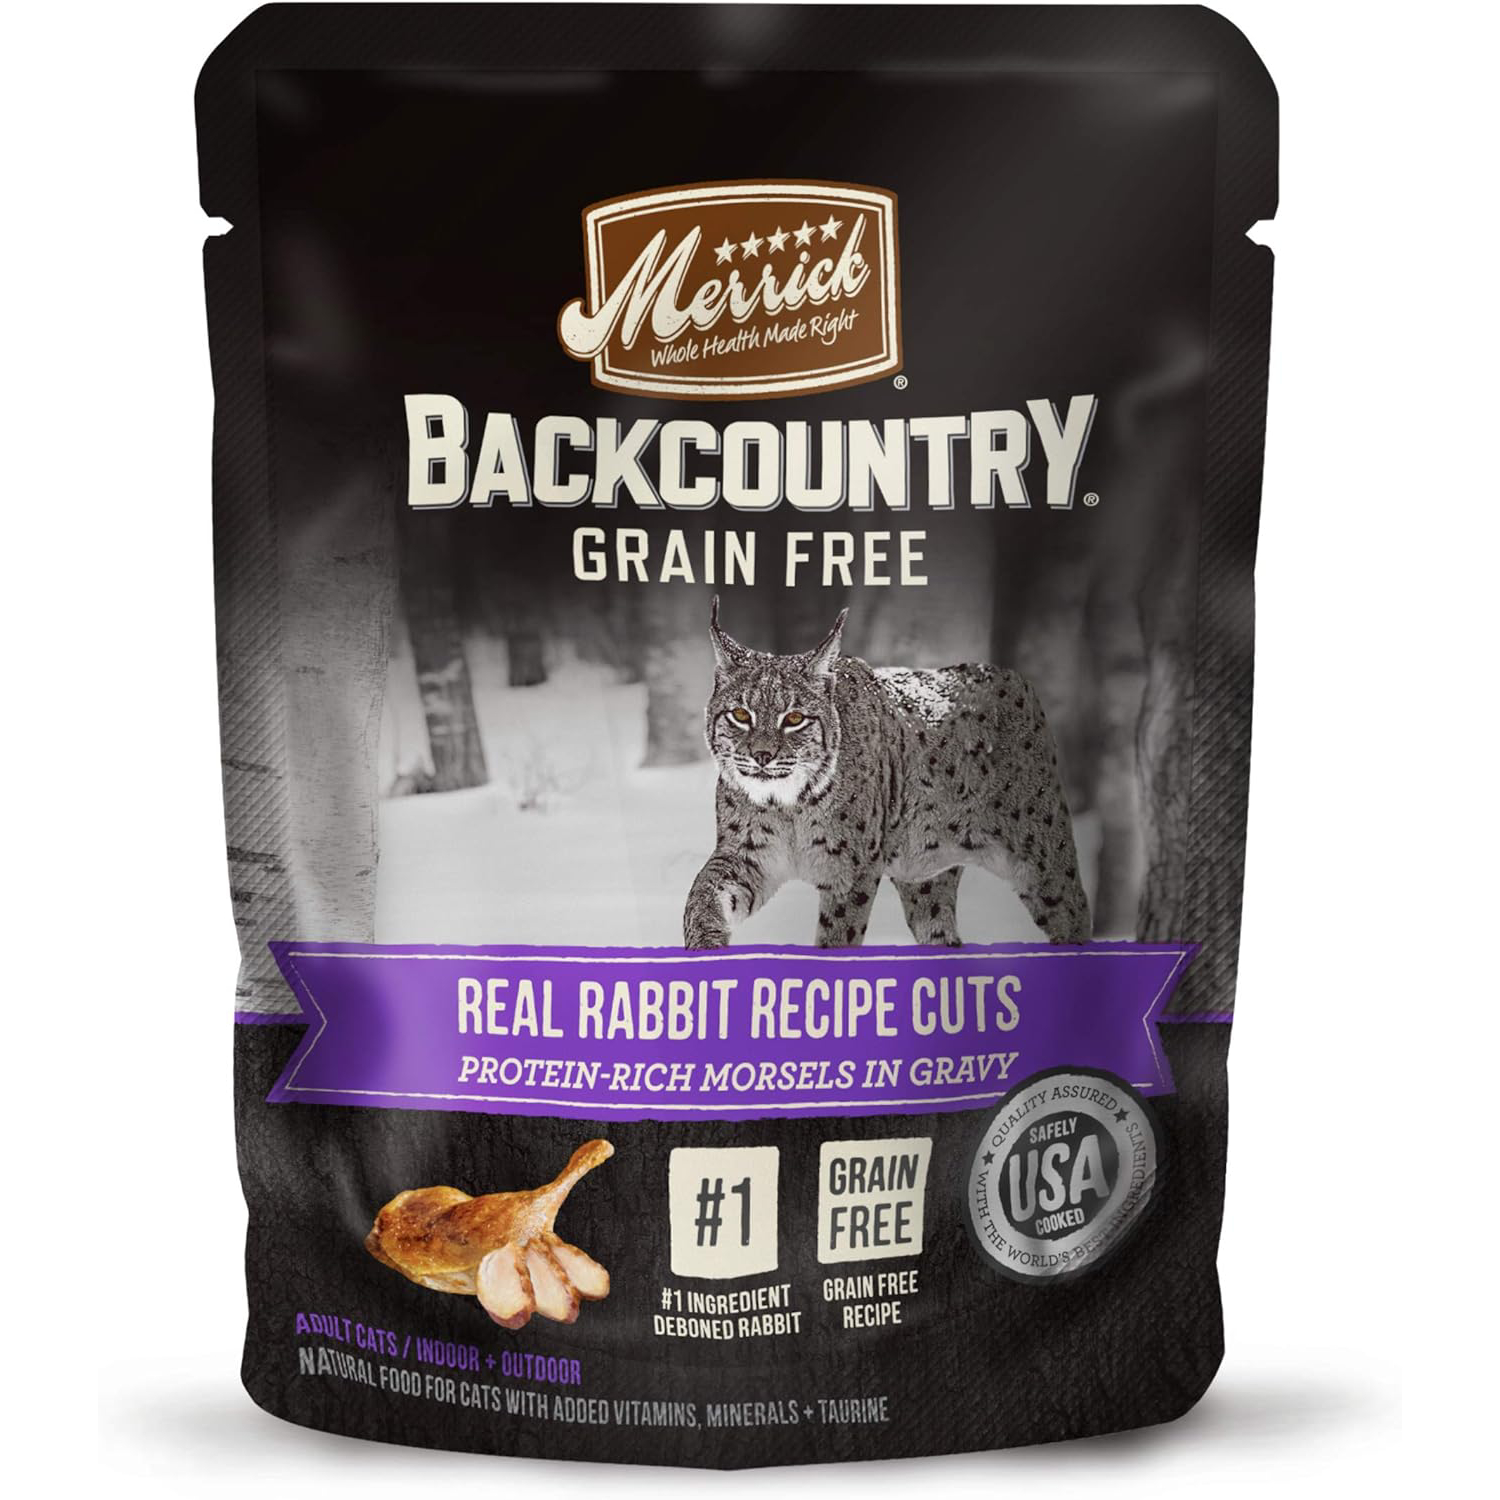 Merrick Backcountry Grain Free Gluten Free Premium High Protein Wet Cat Food, Rabbit Recipe Cuts With Gravy - (Pack of 24) 3 oz. Pouches new